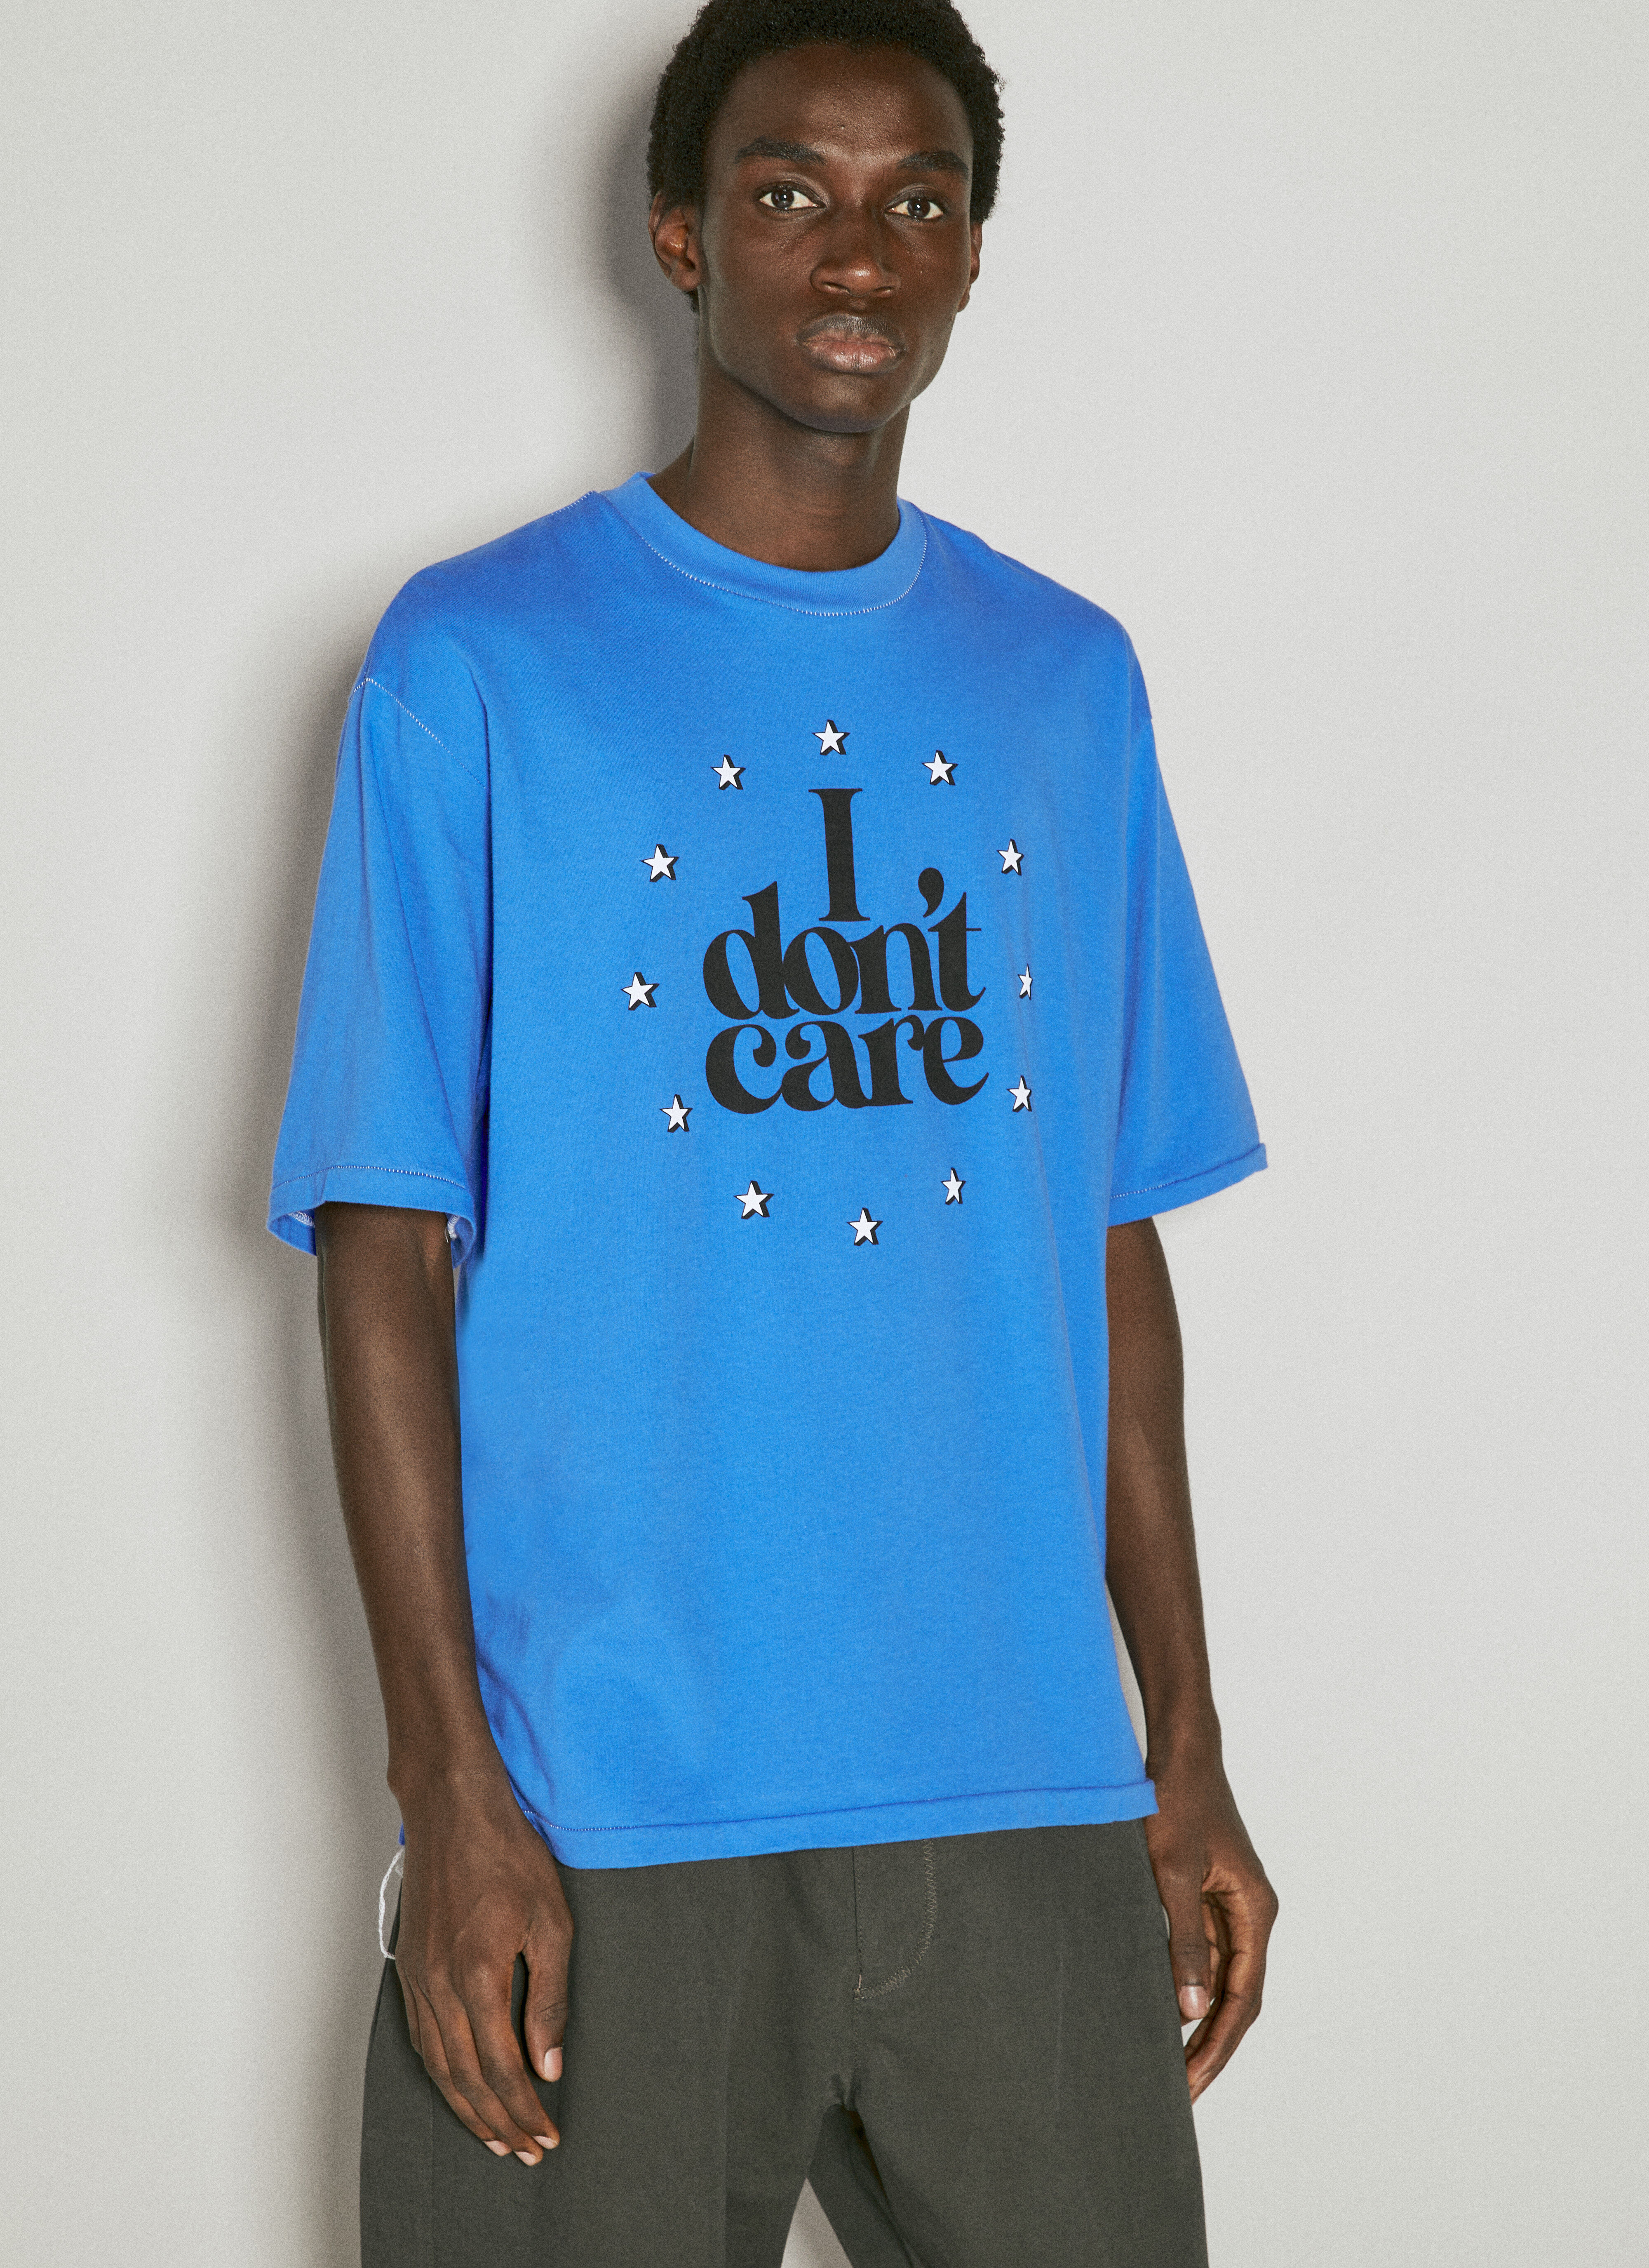 UNDERCOVER I Don't Care T-Shirt 白色 und0153001